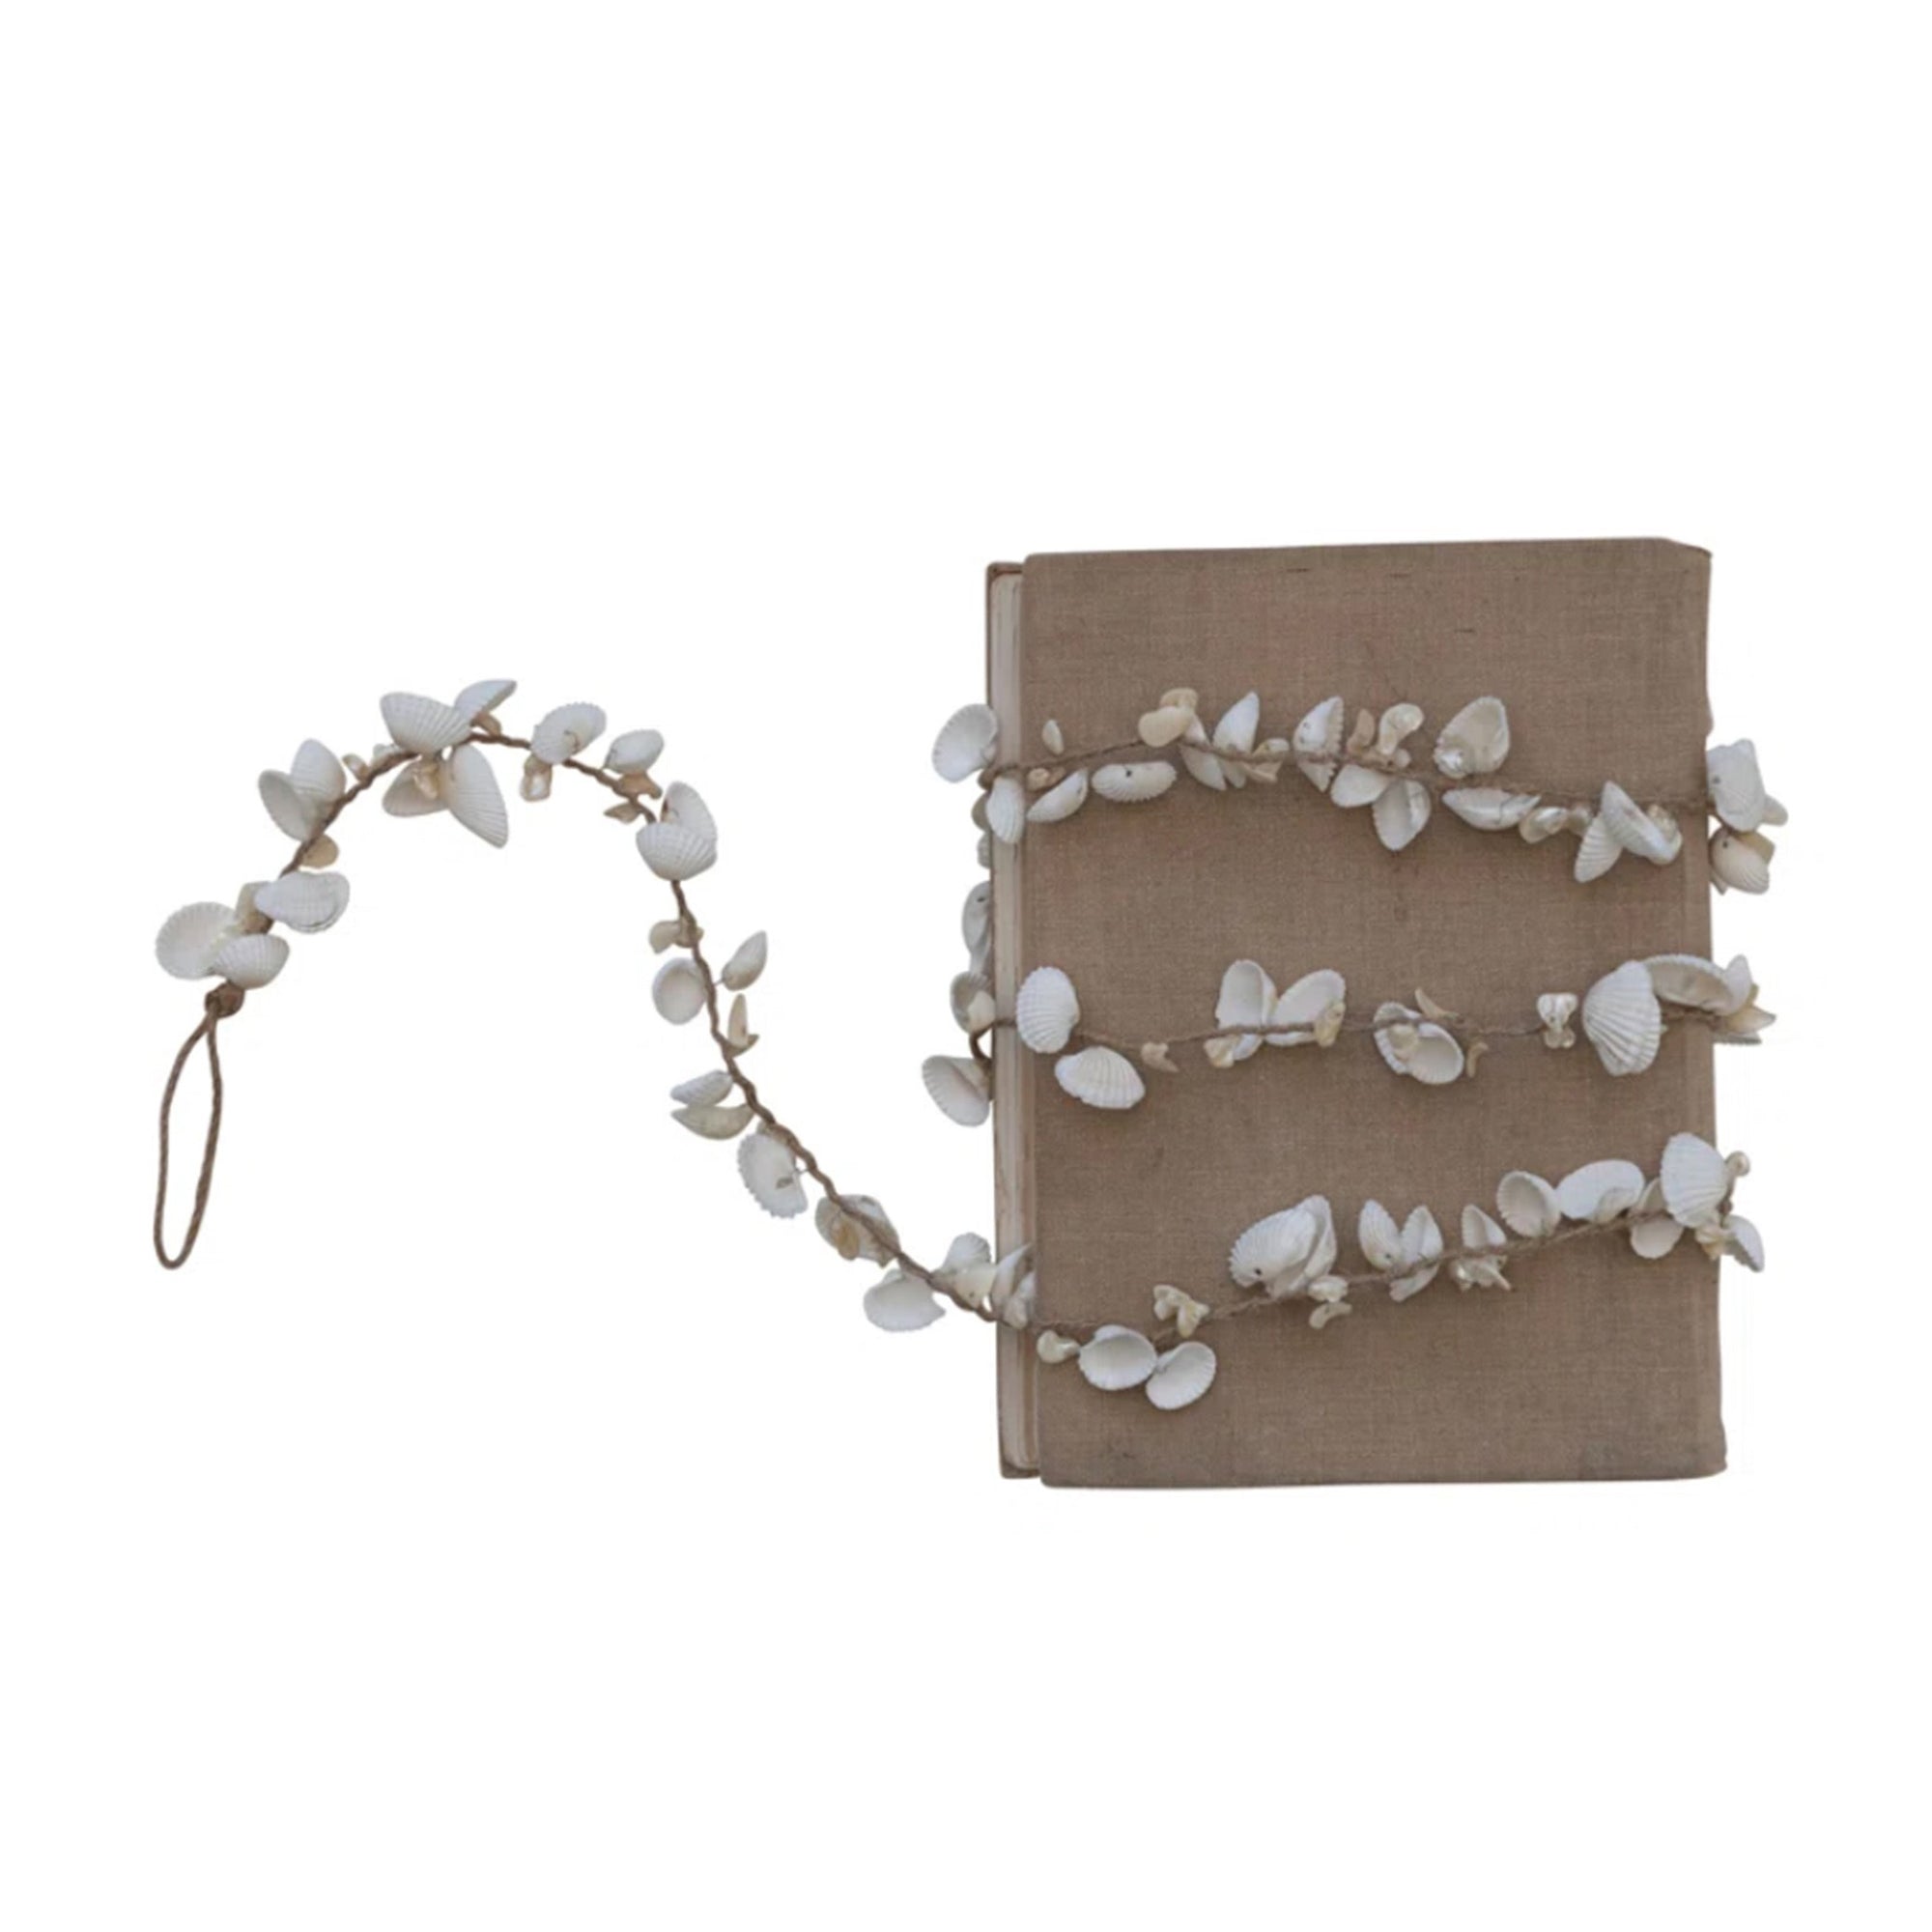 Shell Garland with Beads